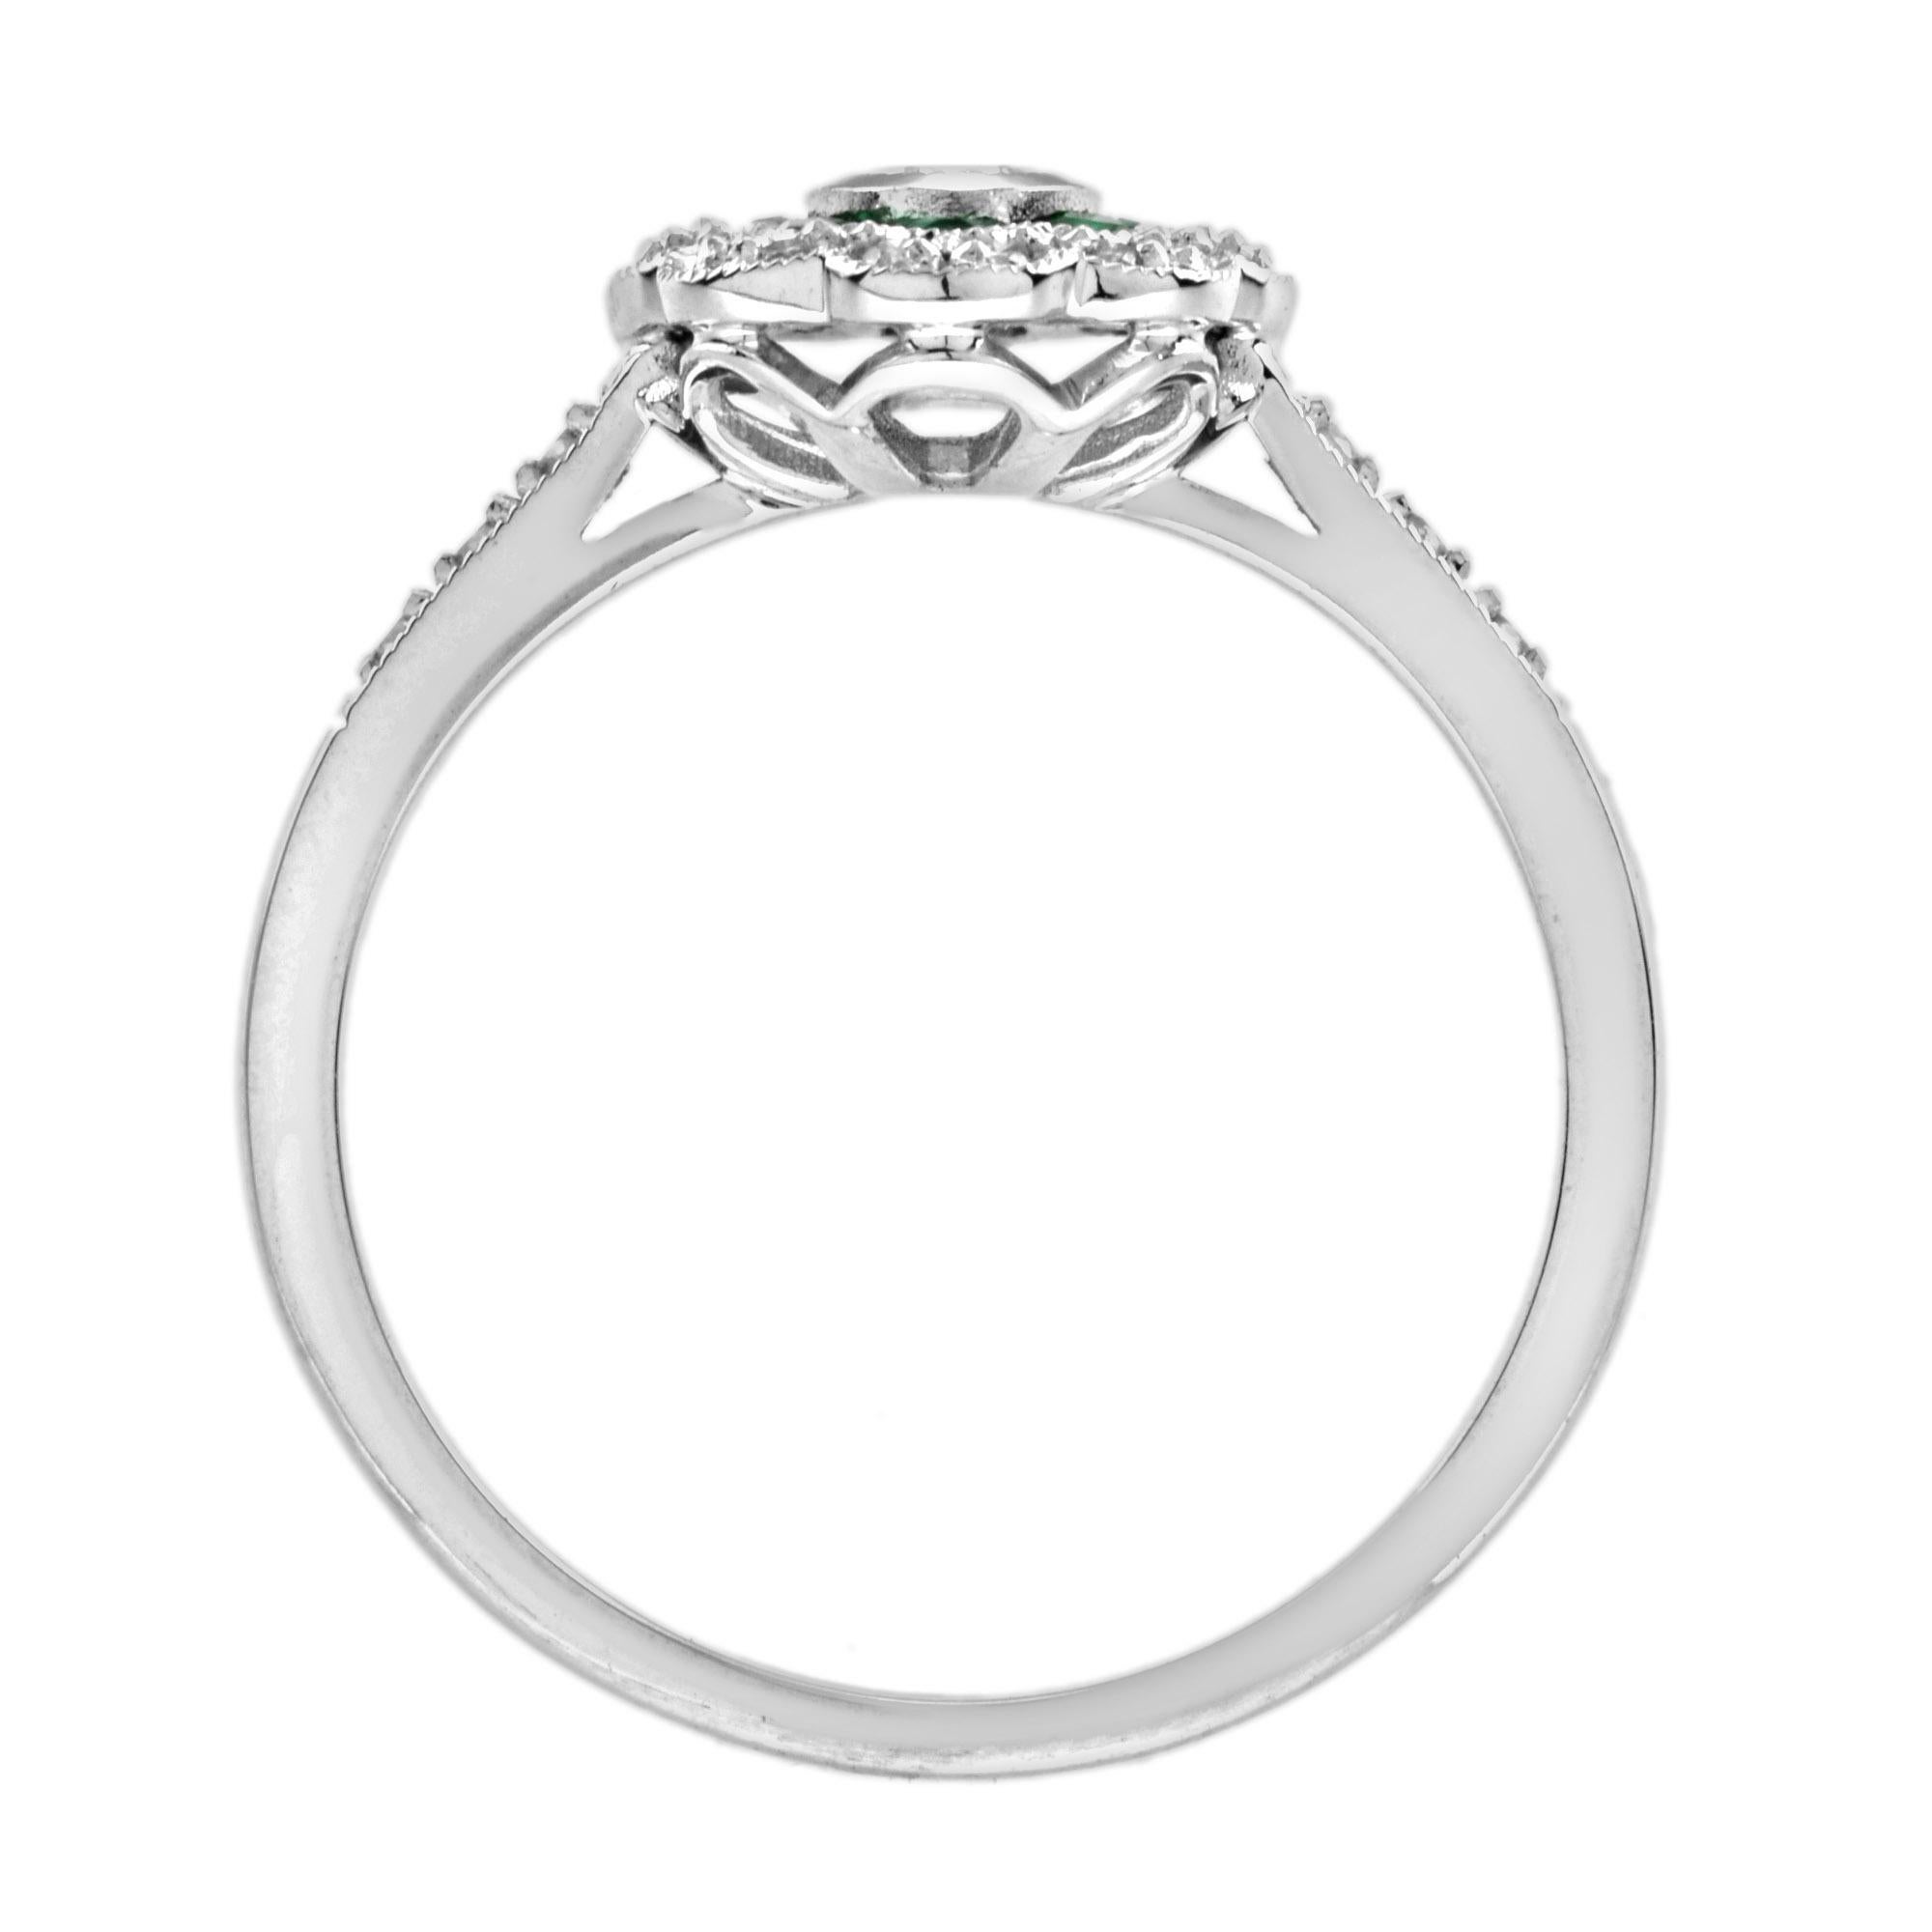 0.15 Ct. Diamond and Emerald Art Deco Style Engagement Ring in 18K White Gold For Sale 1